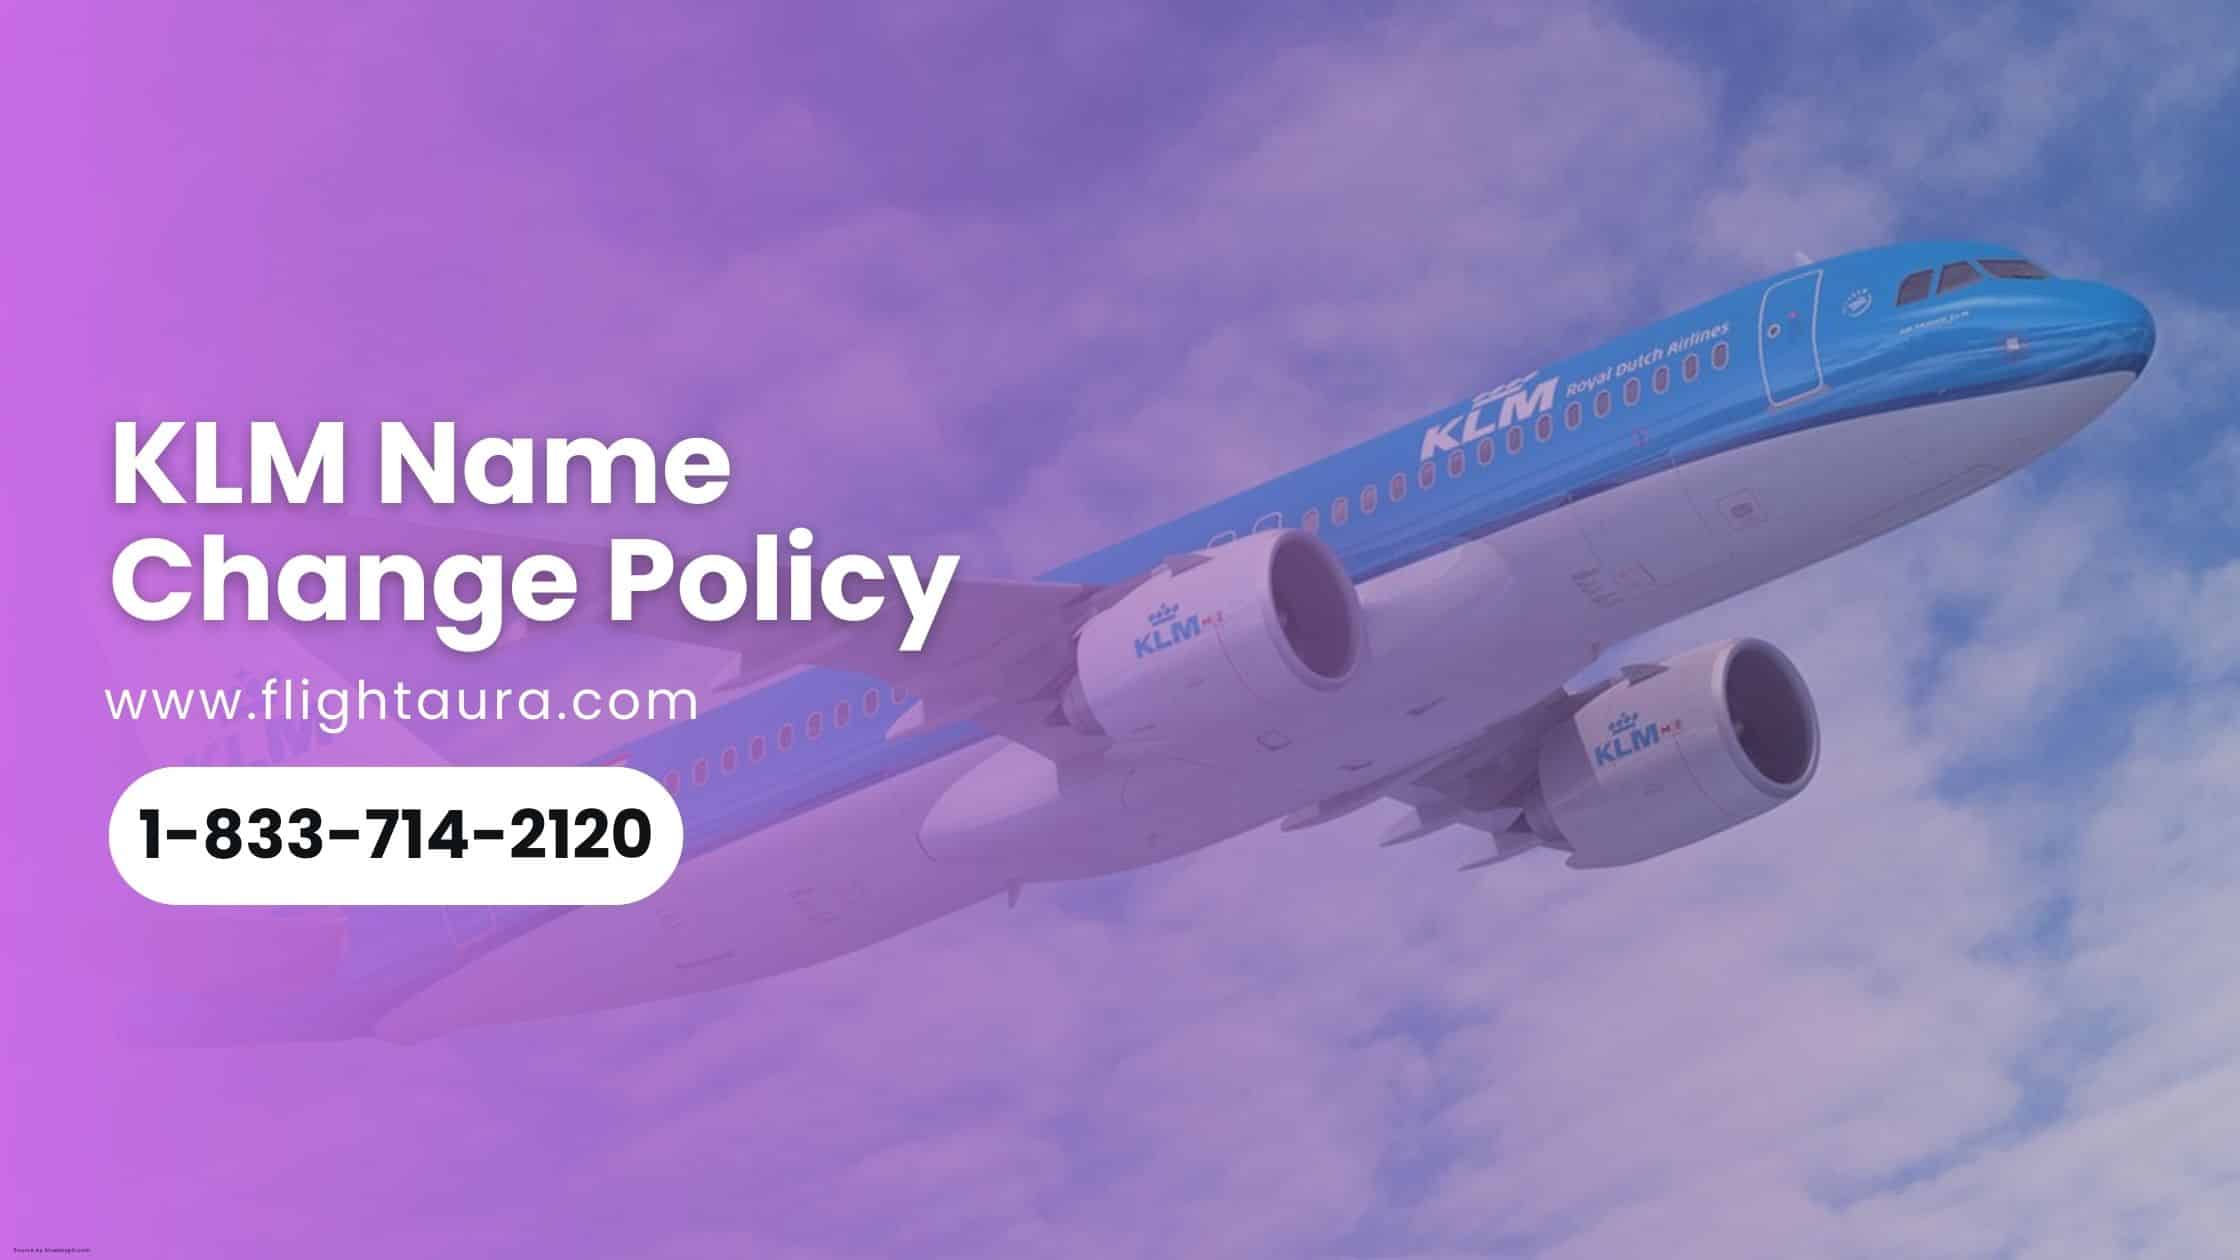 KLM Airline Name Change Policy, Fees - Flightaura